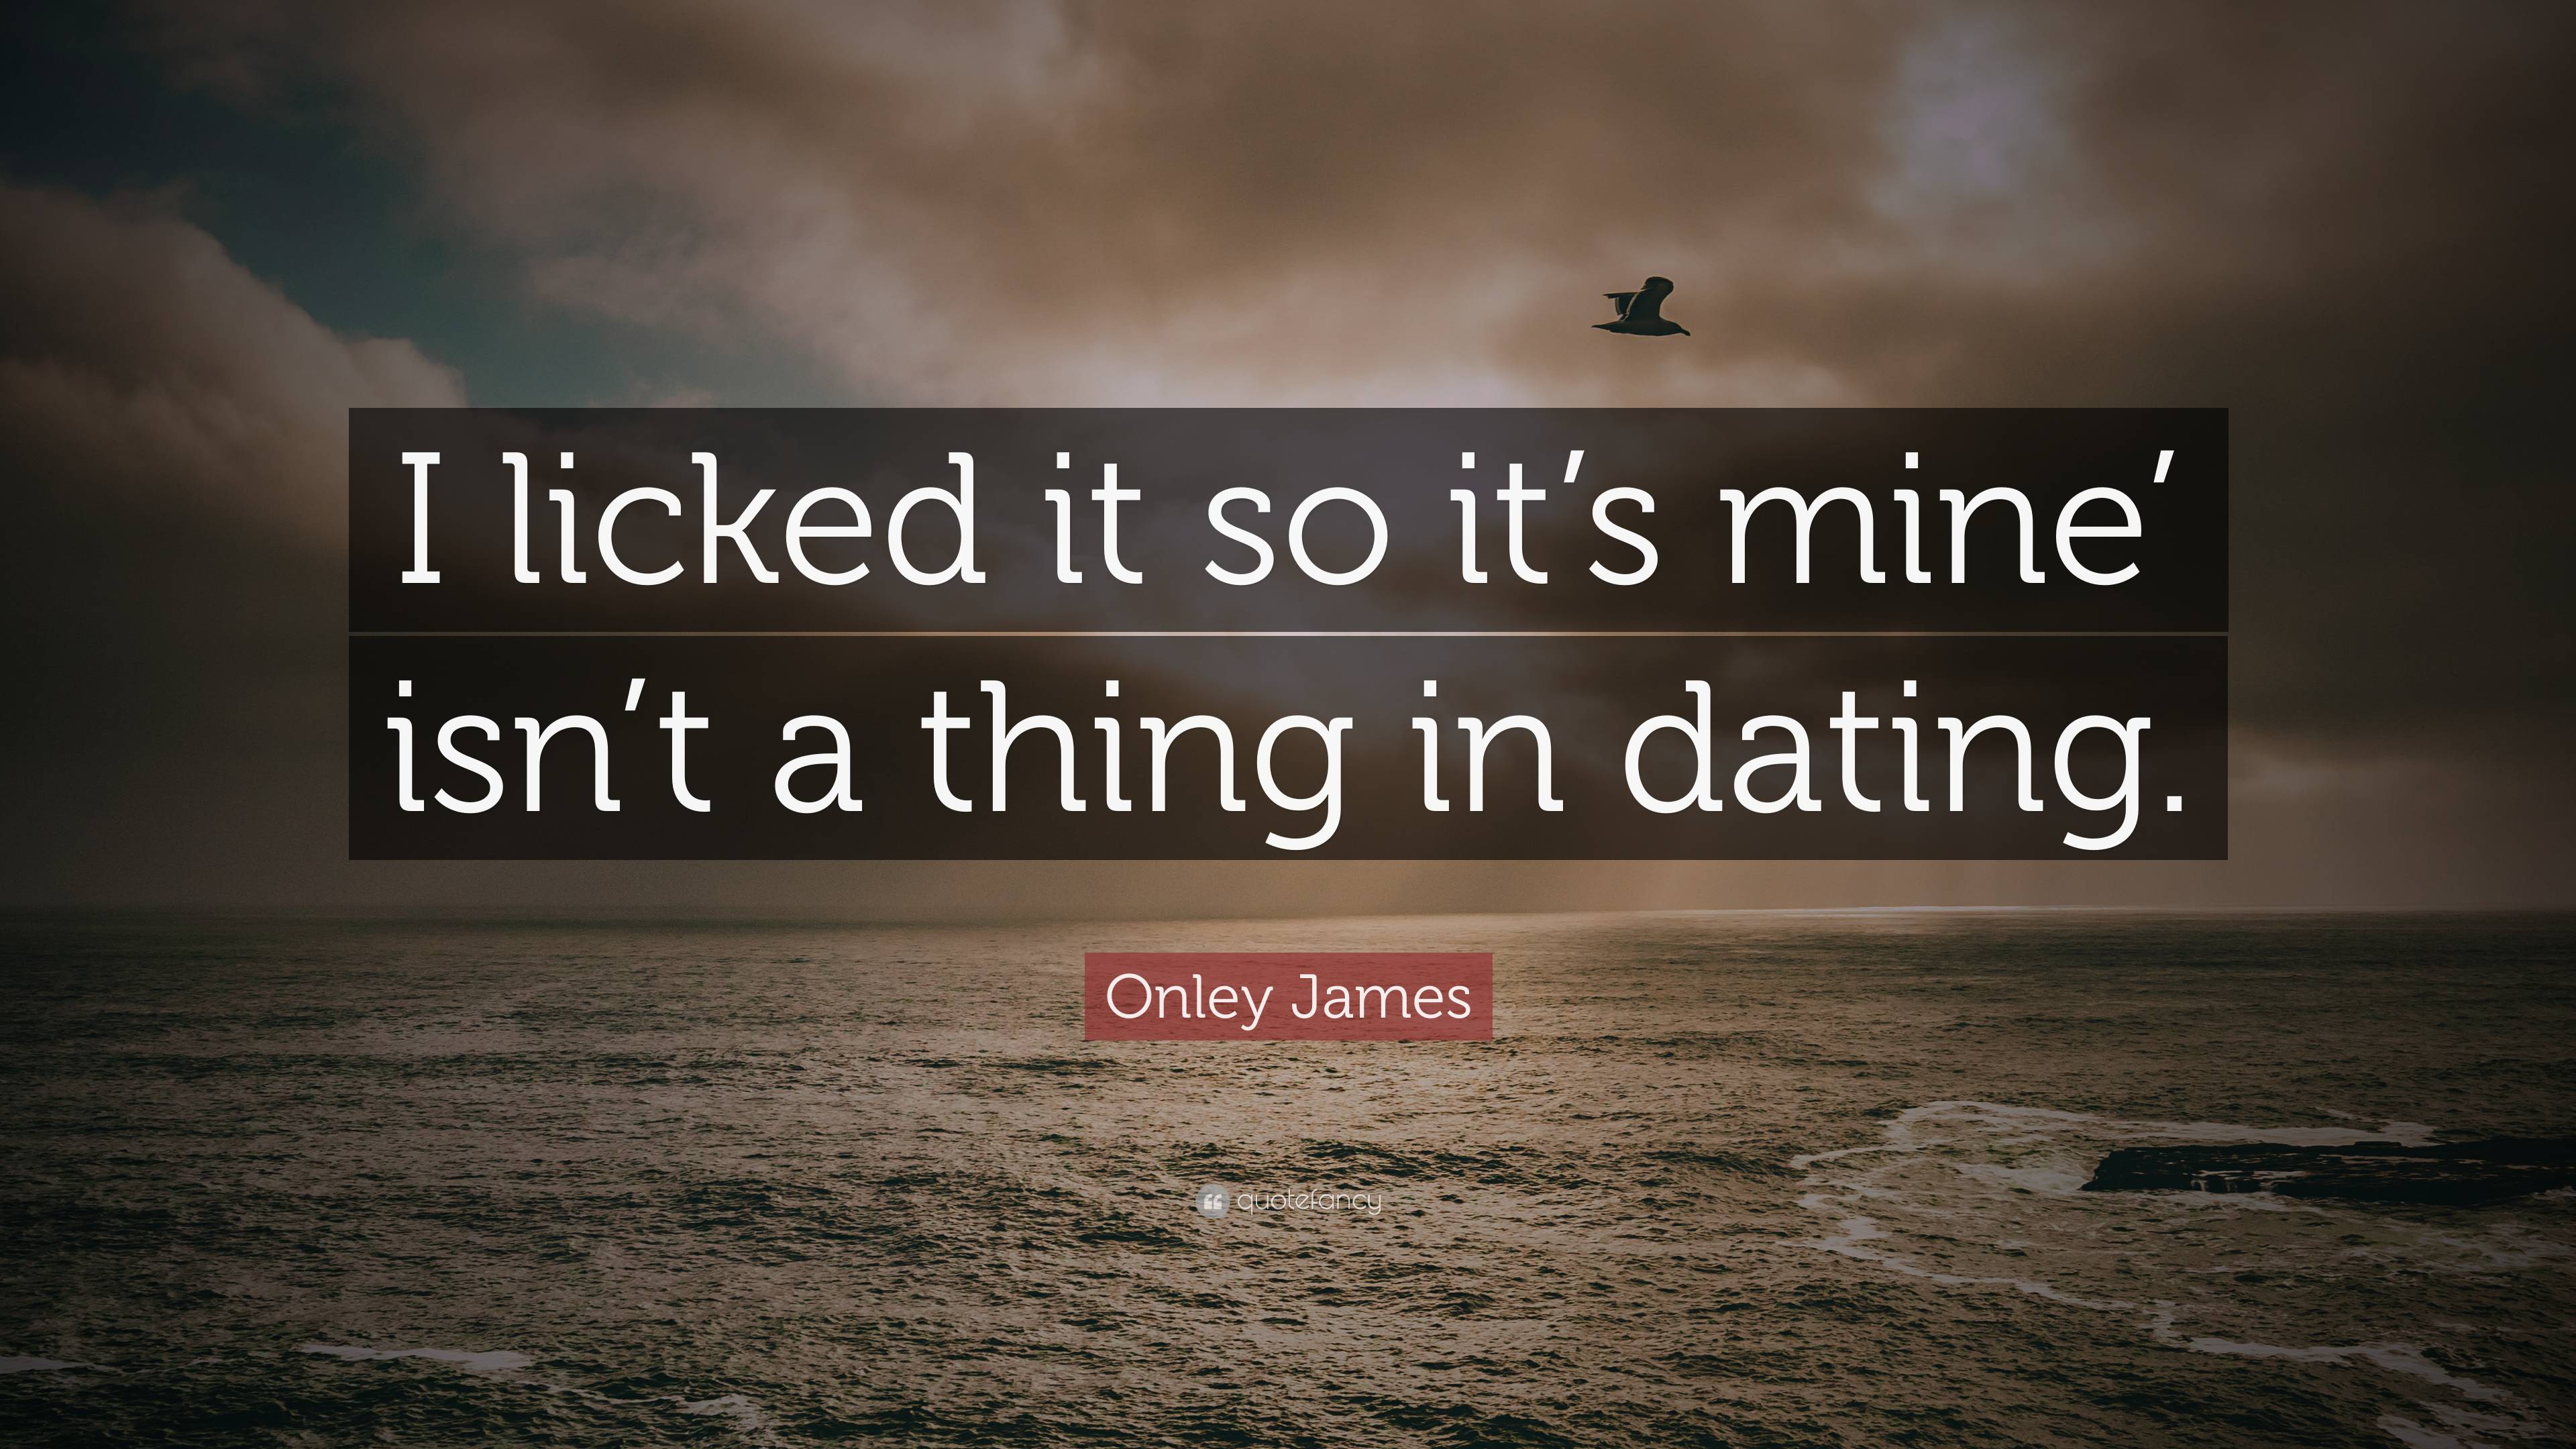 Onley James Quote: “I licked it so it's mine' isn't a thing in